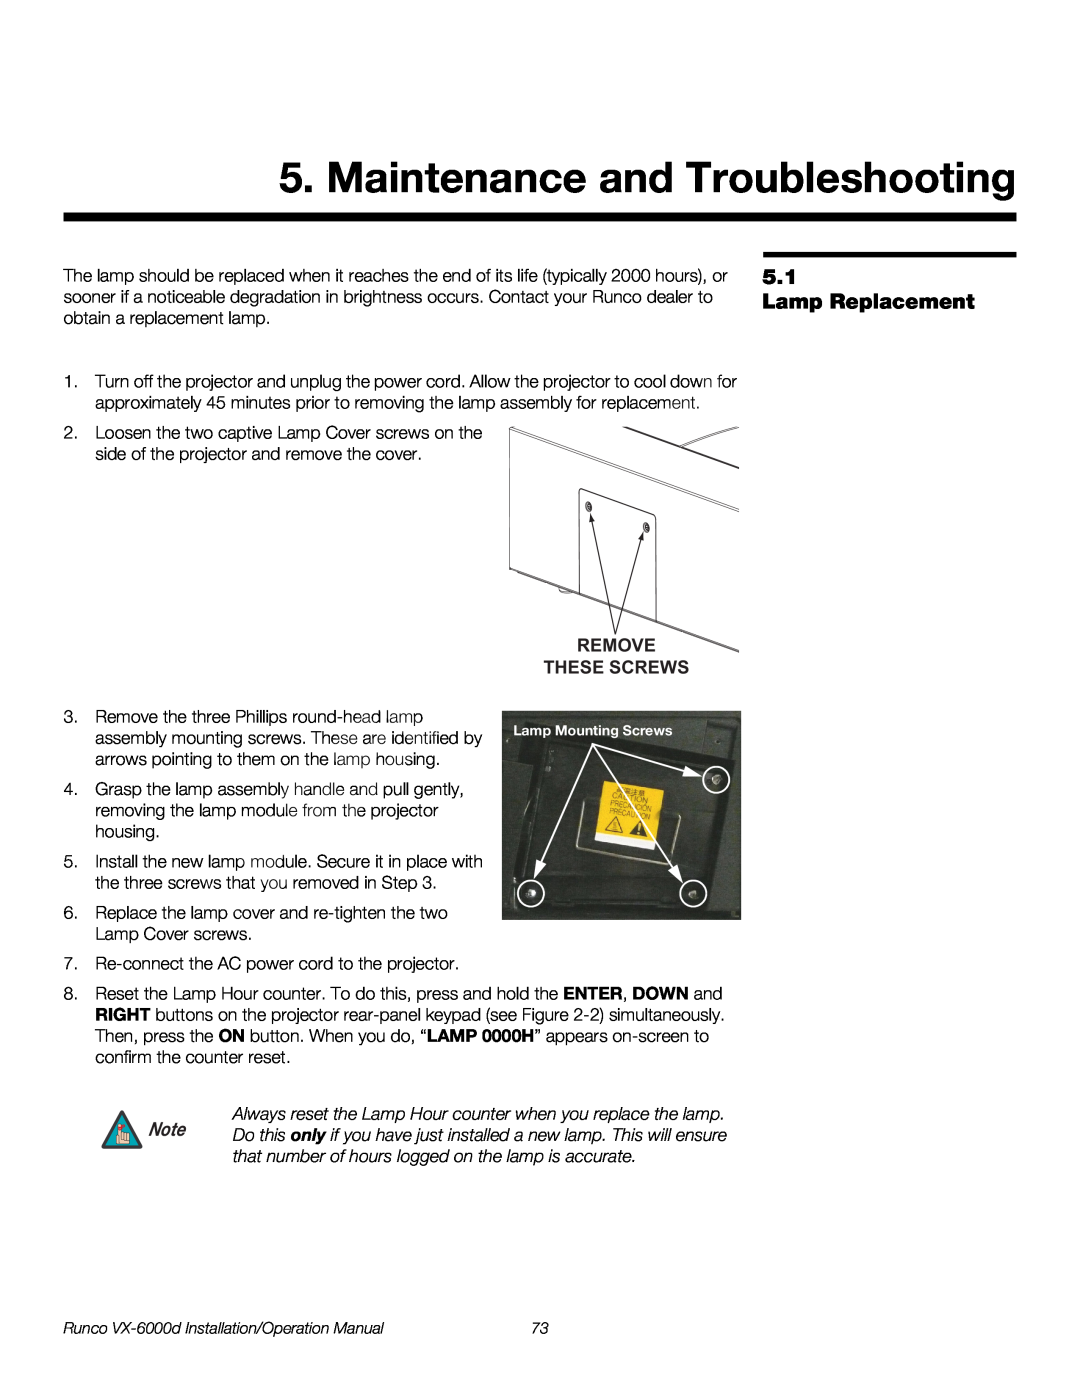 Runco VX-6000D operation manual Maintenance and Troubleshooting, Lamp Replacement, Remove These Screws 